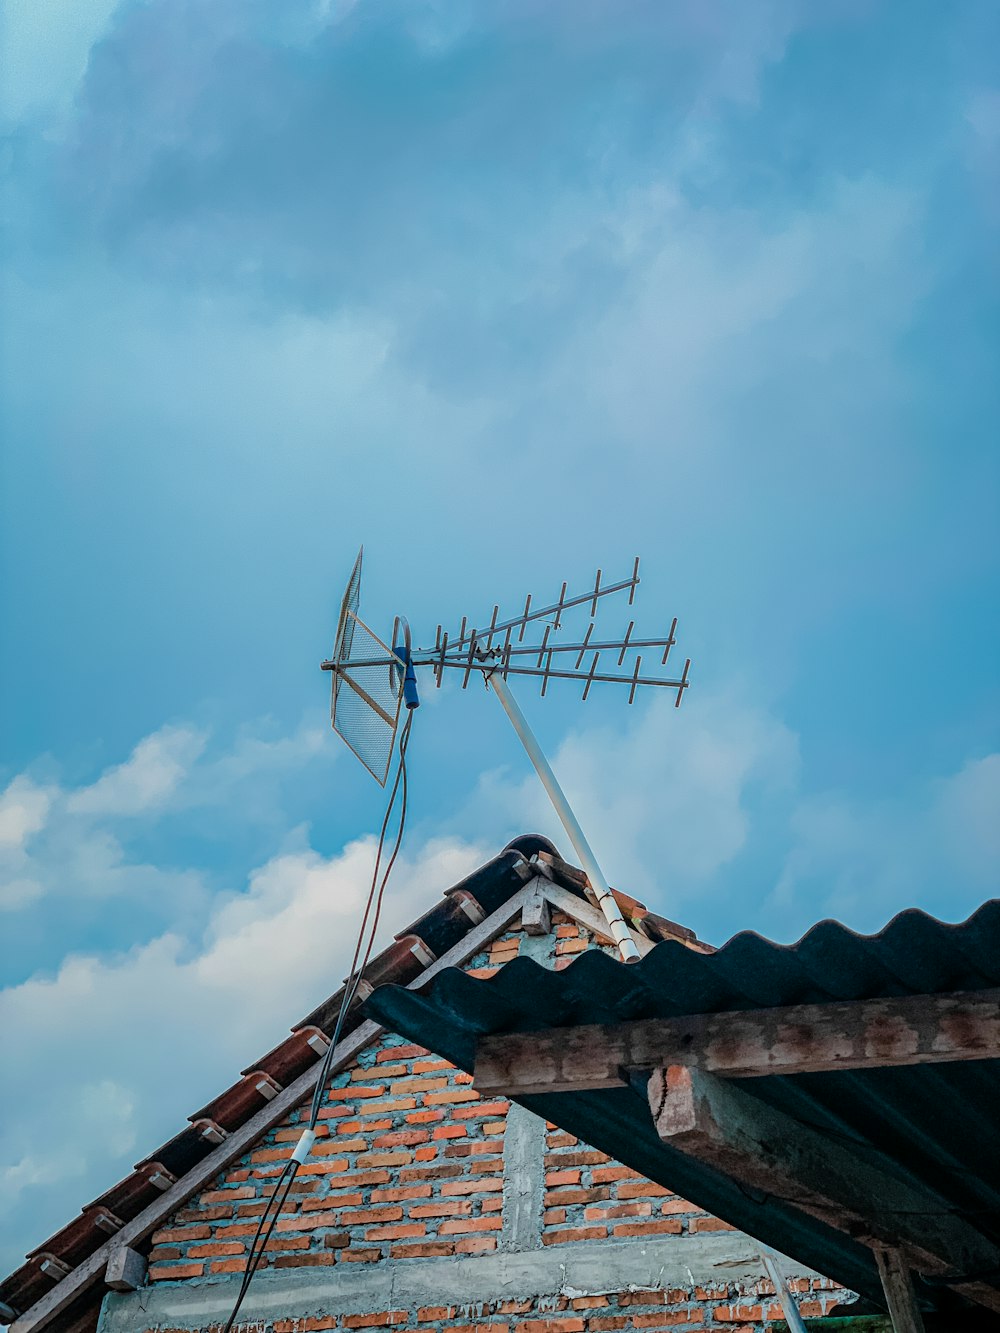 a weather vane on the roof of a house